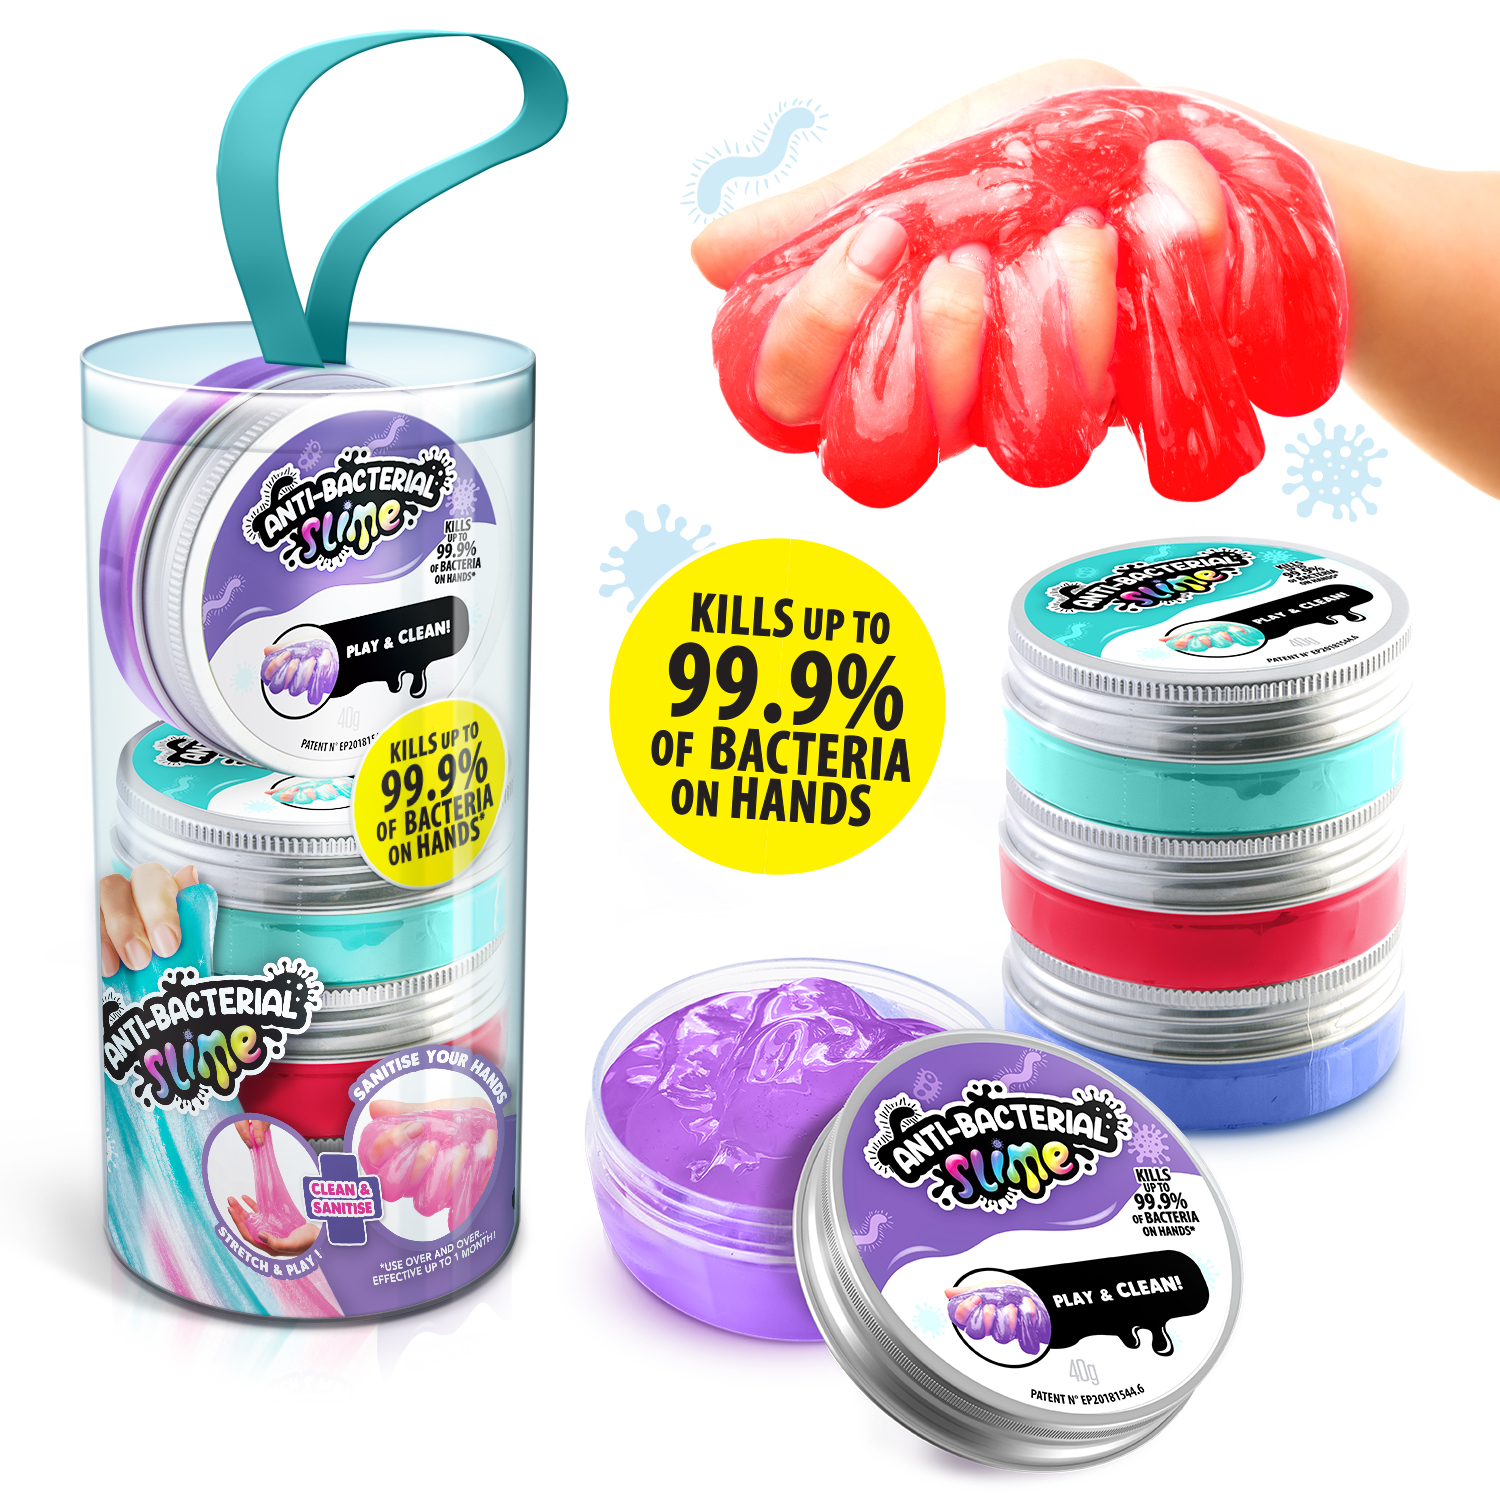 Canal Toys launches innovative new Anti-Bacterial Slime - Toy